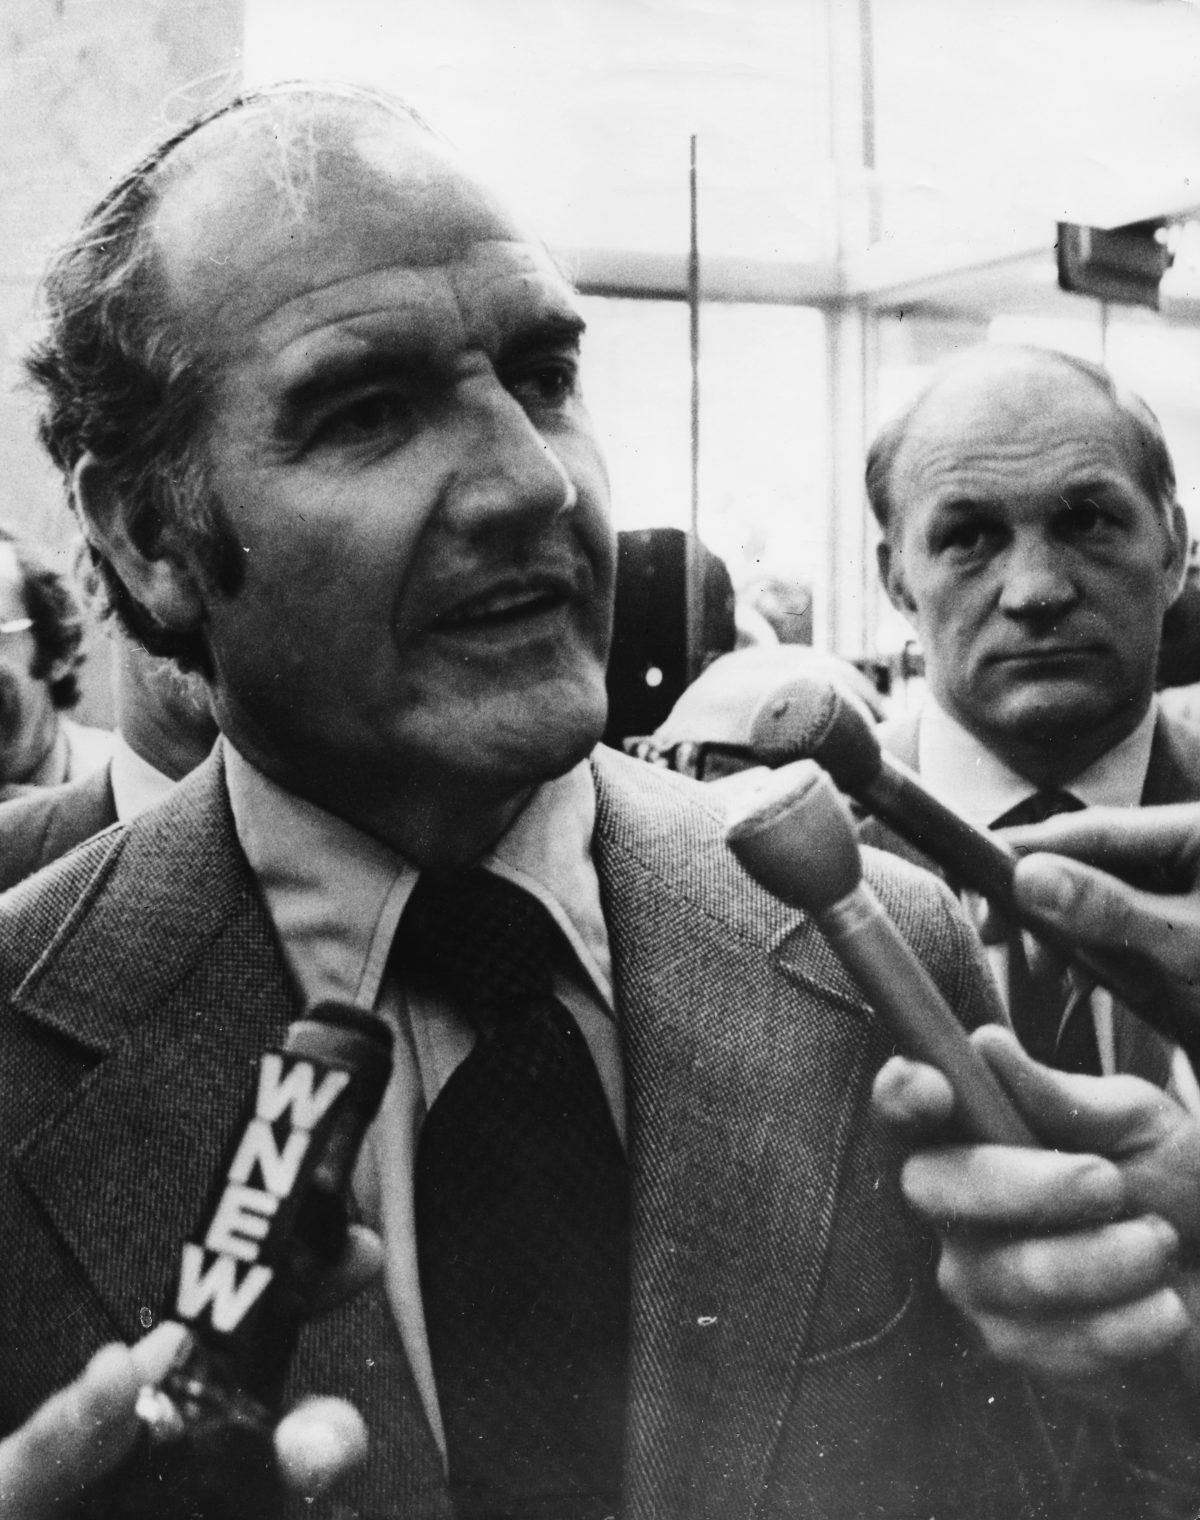 Sen. George McGovern (D-S.D.) being interviewed during his campaign for president, on June 20, 1972. (Keystone/Hulton Archive/Getty Images)